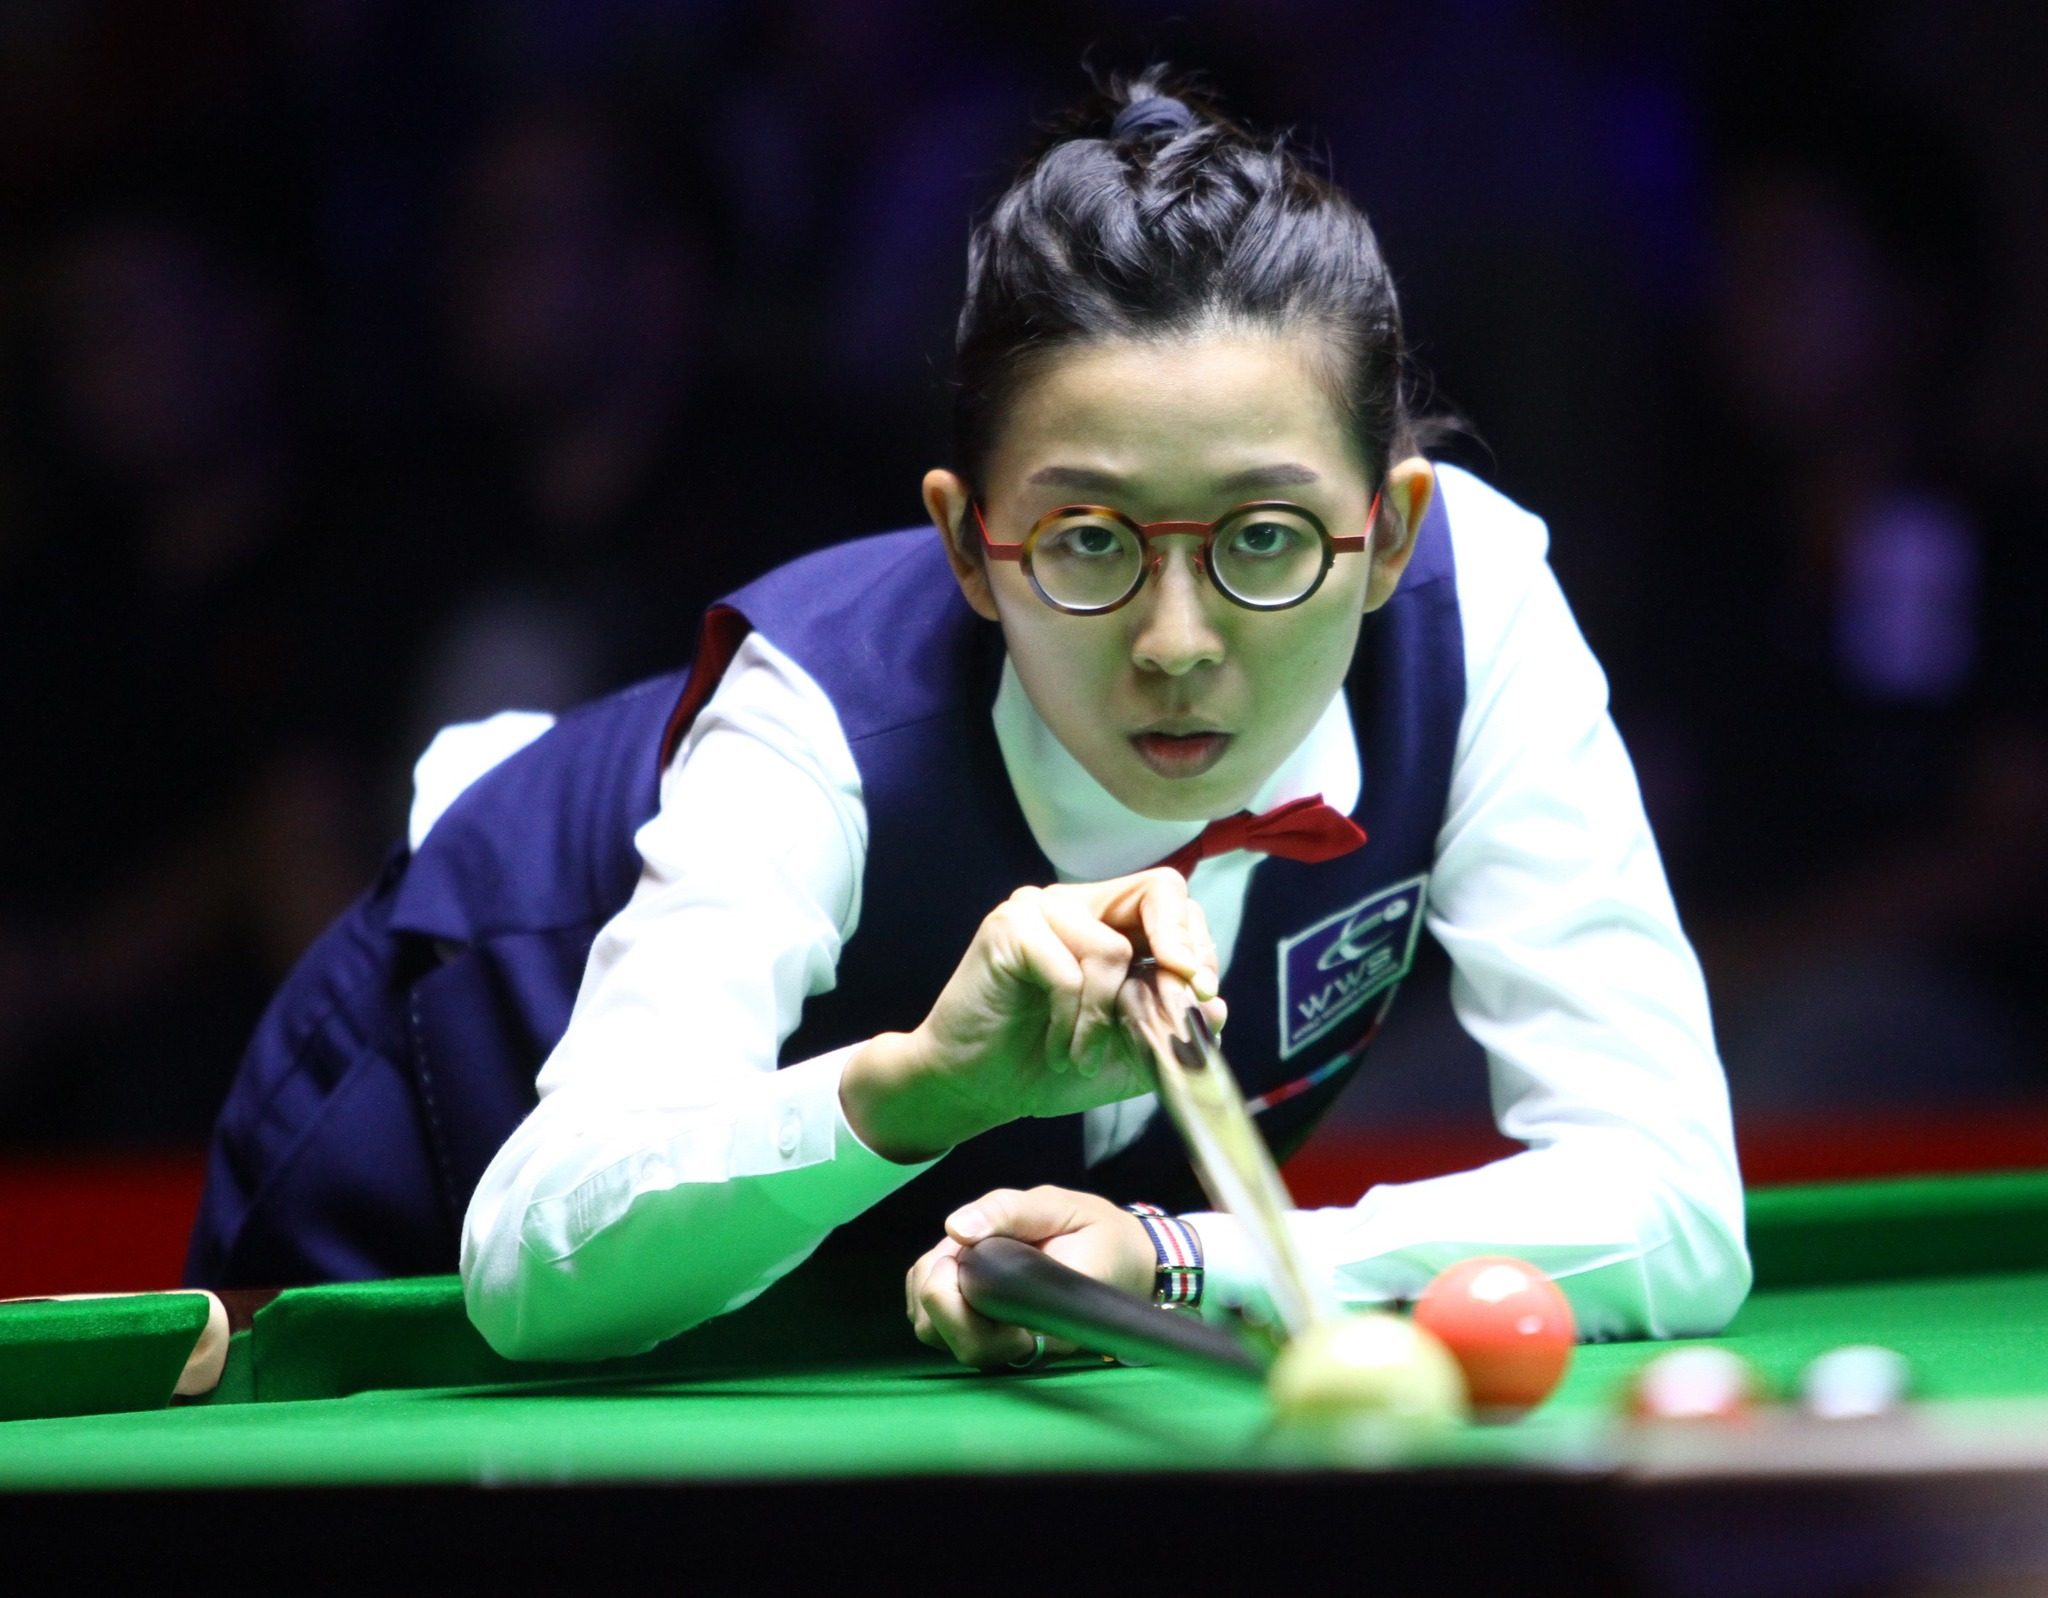 Hong Kong snooker star Ng On-yee drops out of world top 2 for first time in 9 years after Belgian Womens Open exit South China Morning Post